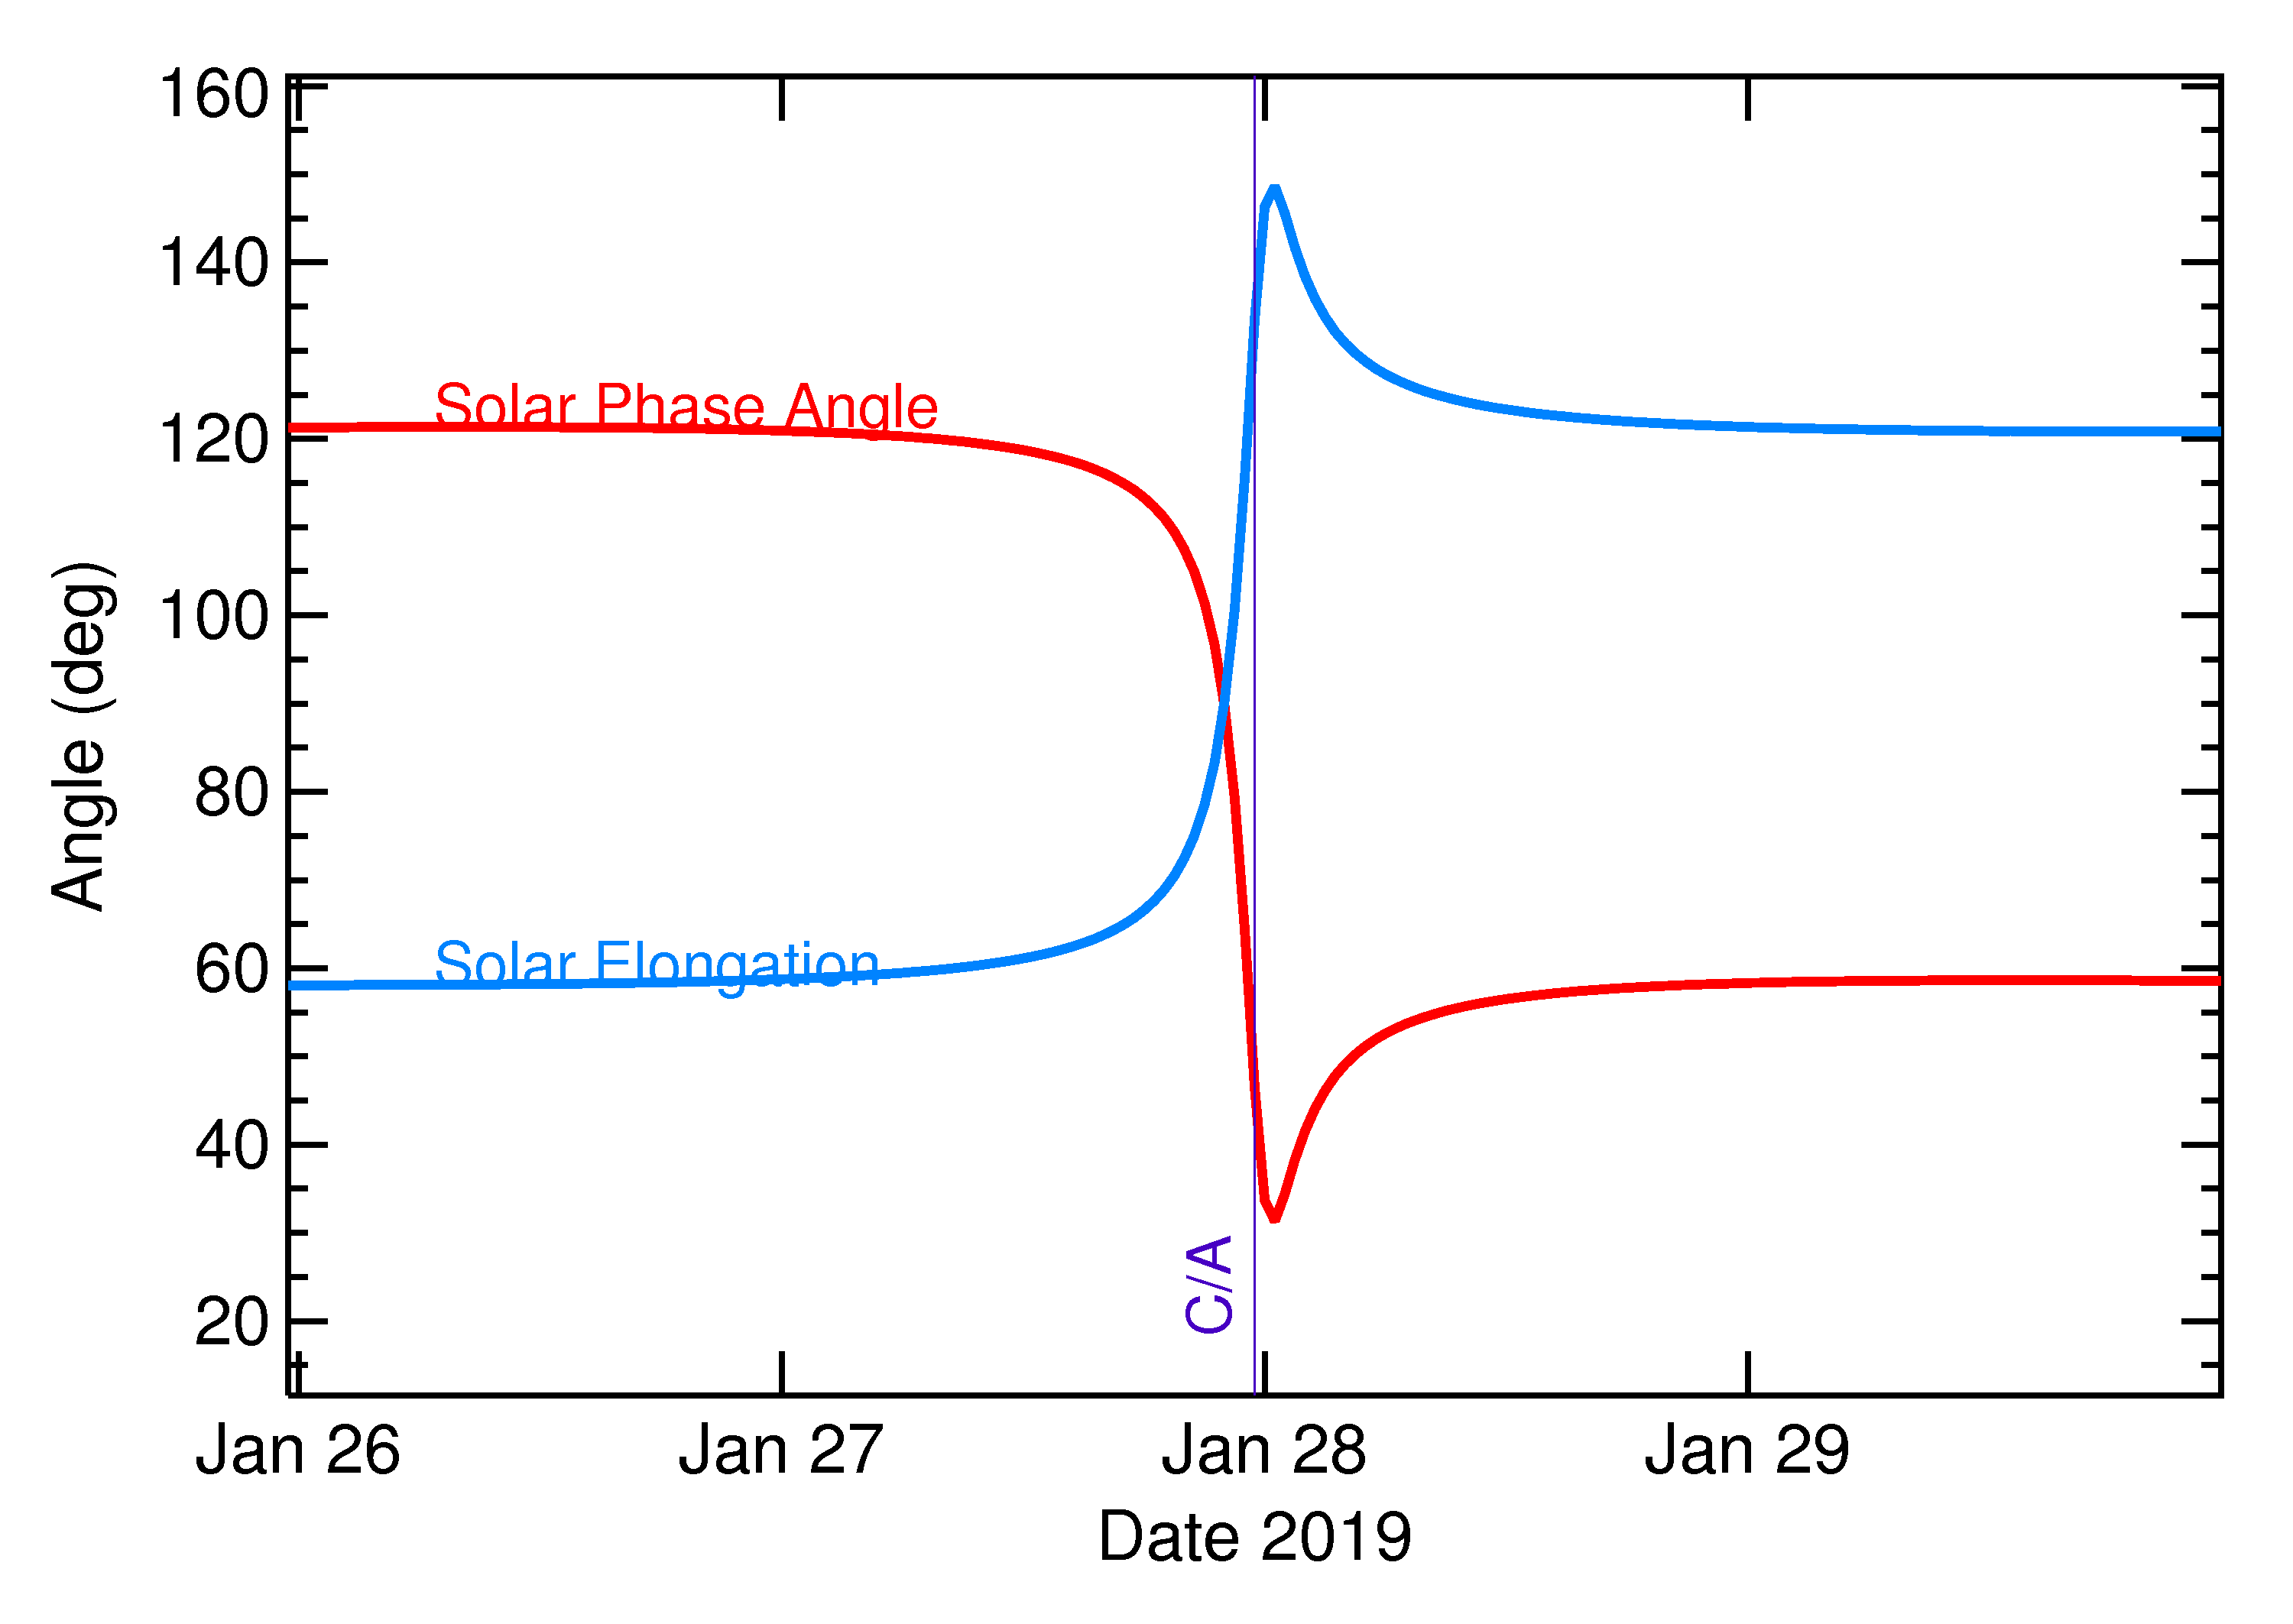 Solar Elongation and Solar Phase Angle of 2019 BZ3 in the days around closest approach